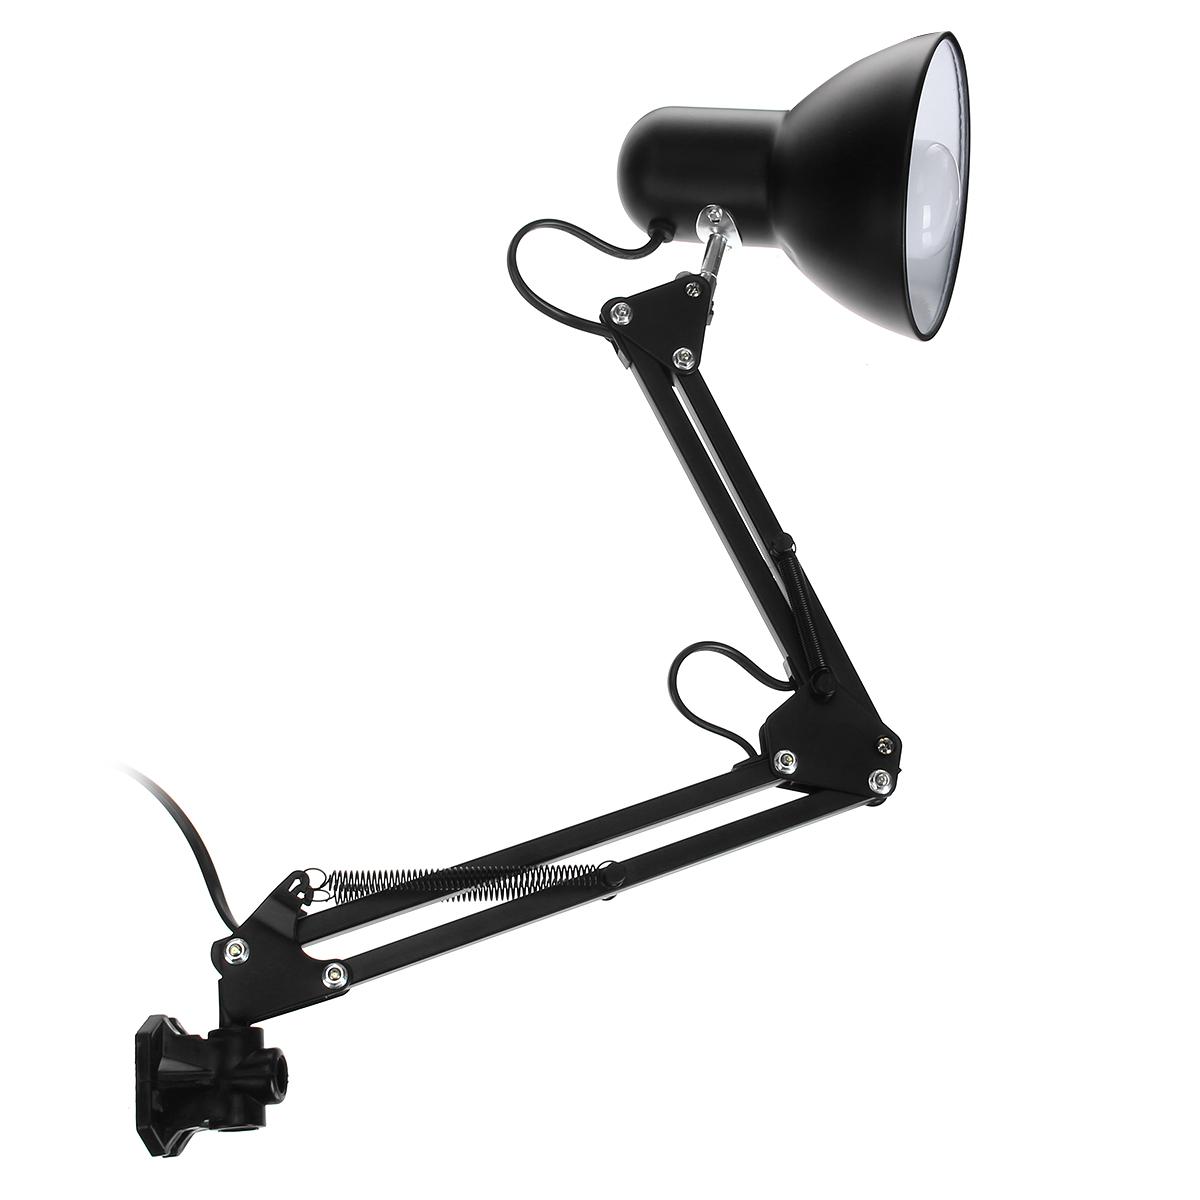 5W-Super-Bright-Swing-Arm-Desk-Lamp-Clamp-on-Table-Light-with-LED-Bulb-Metal-Clip-220V-1742397-12